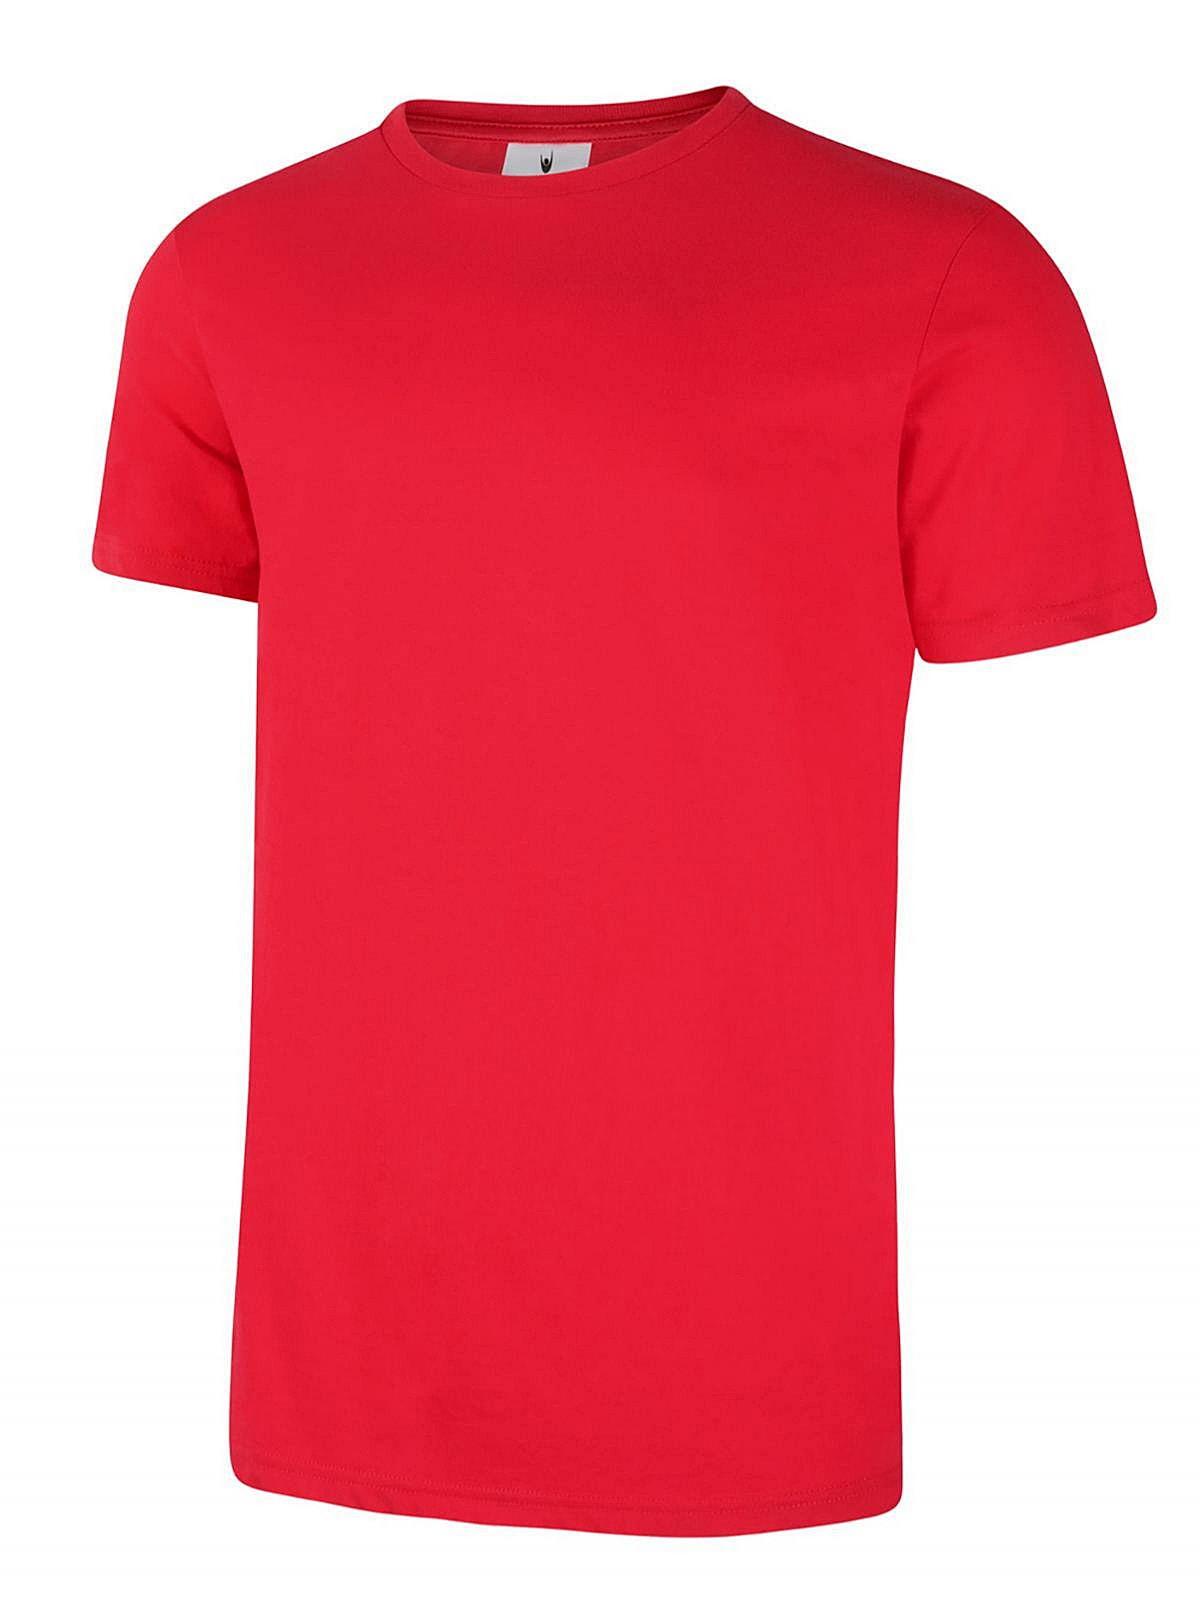 Uneek 150GSM Olympic T-Shirt in Red (Product Code: UC320)